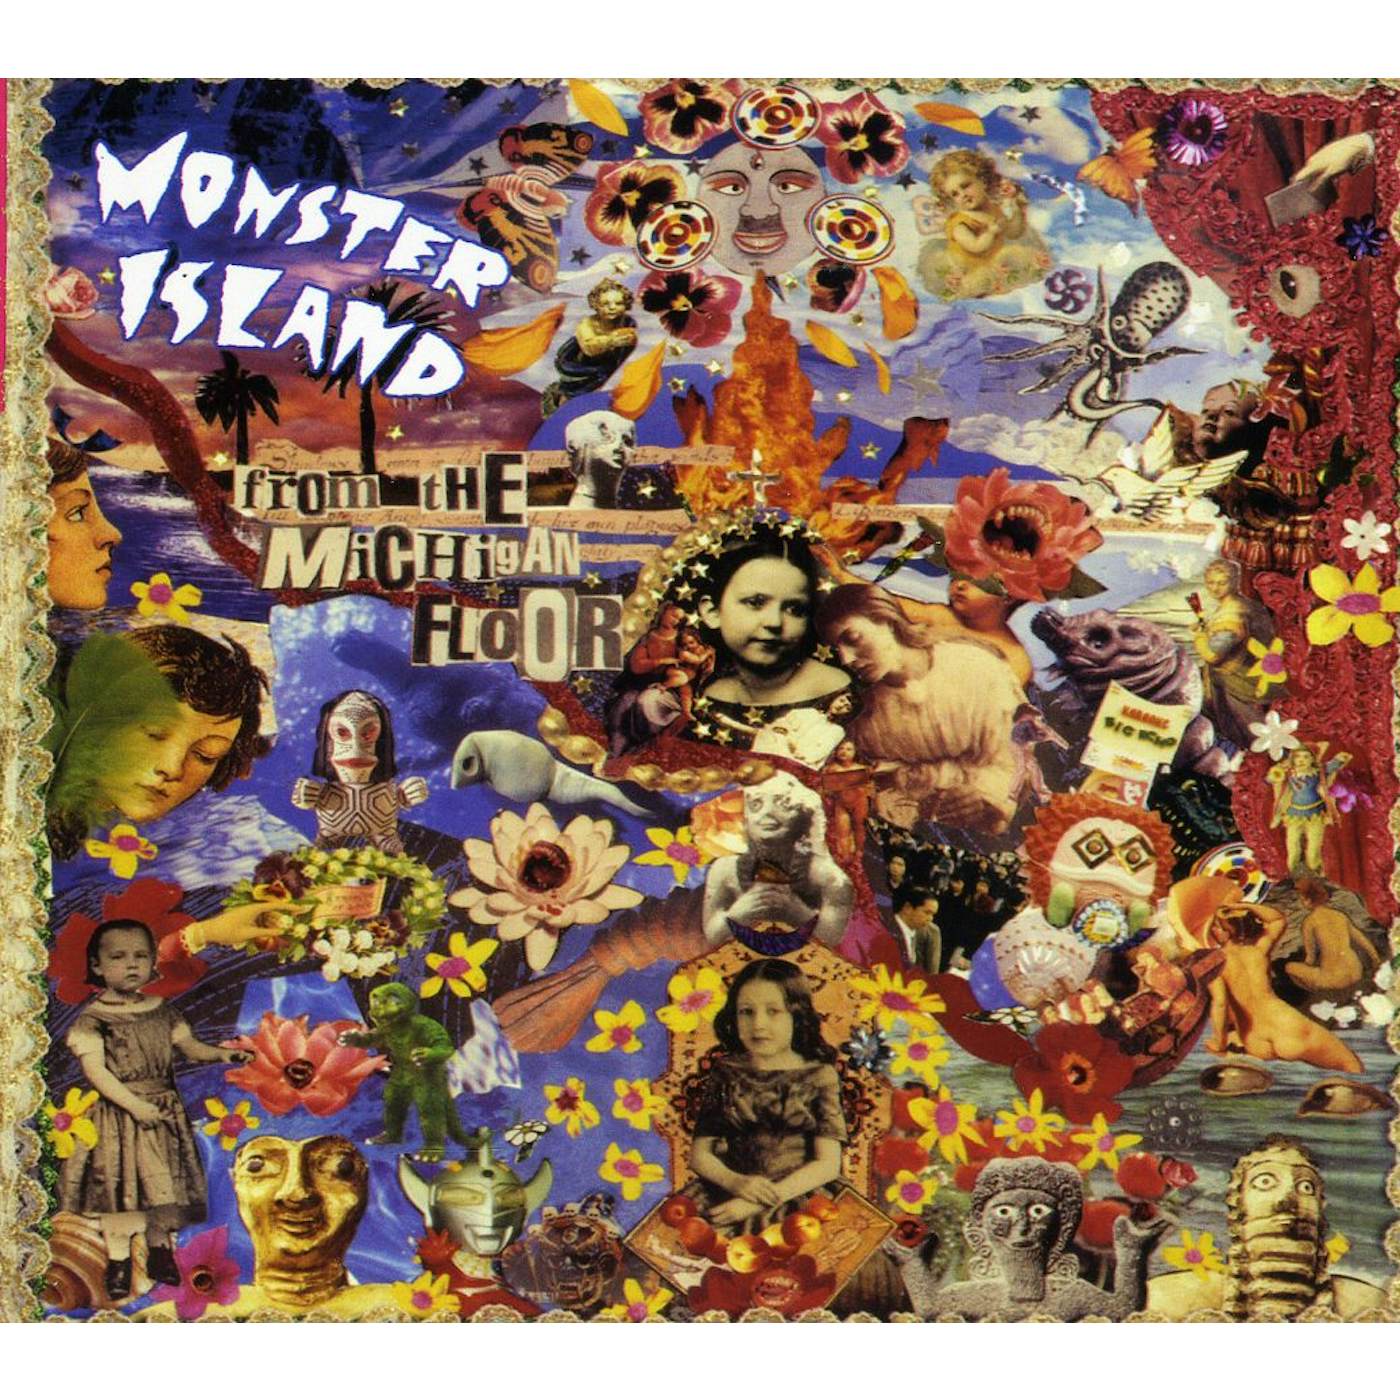 Monster Island FROM THE MICHIGAN FLOOR CD